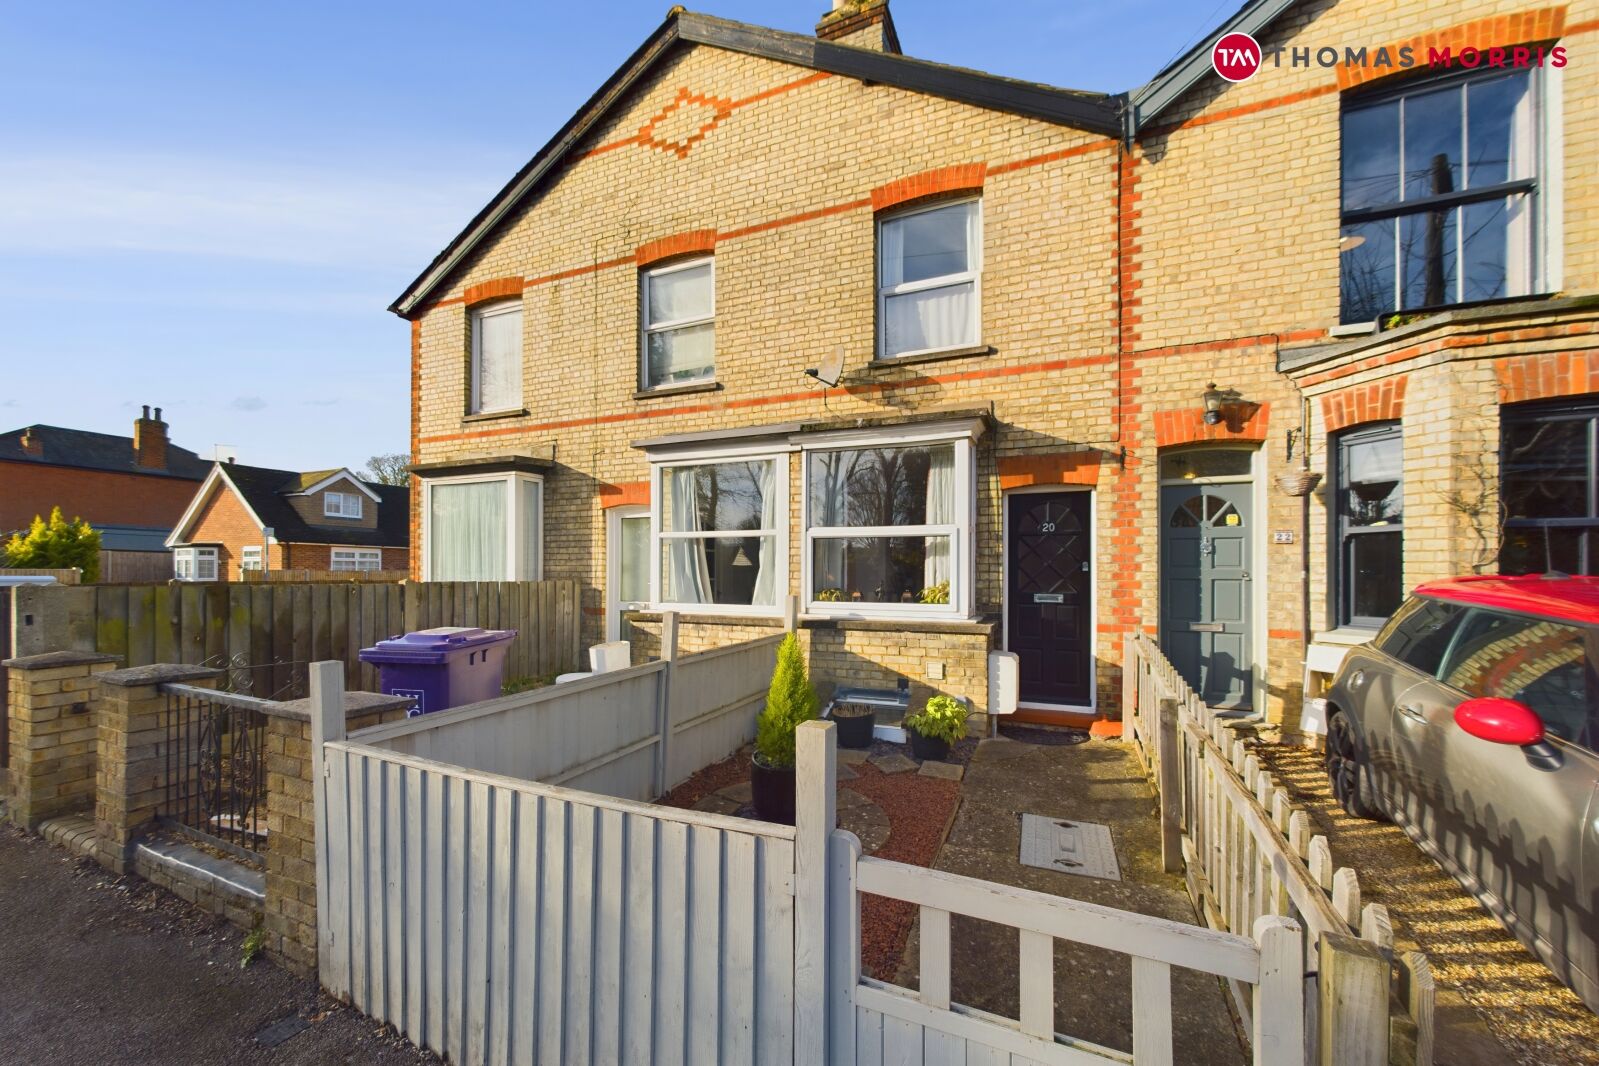 2 bedroom mid terraced house for sale Melbourn Road, Royston, SG8, main image